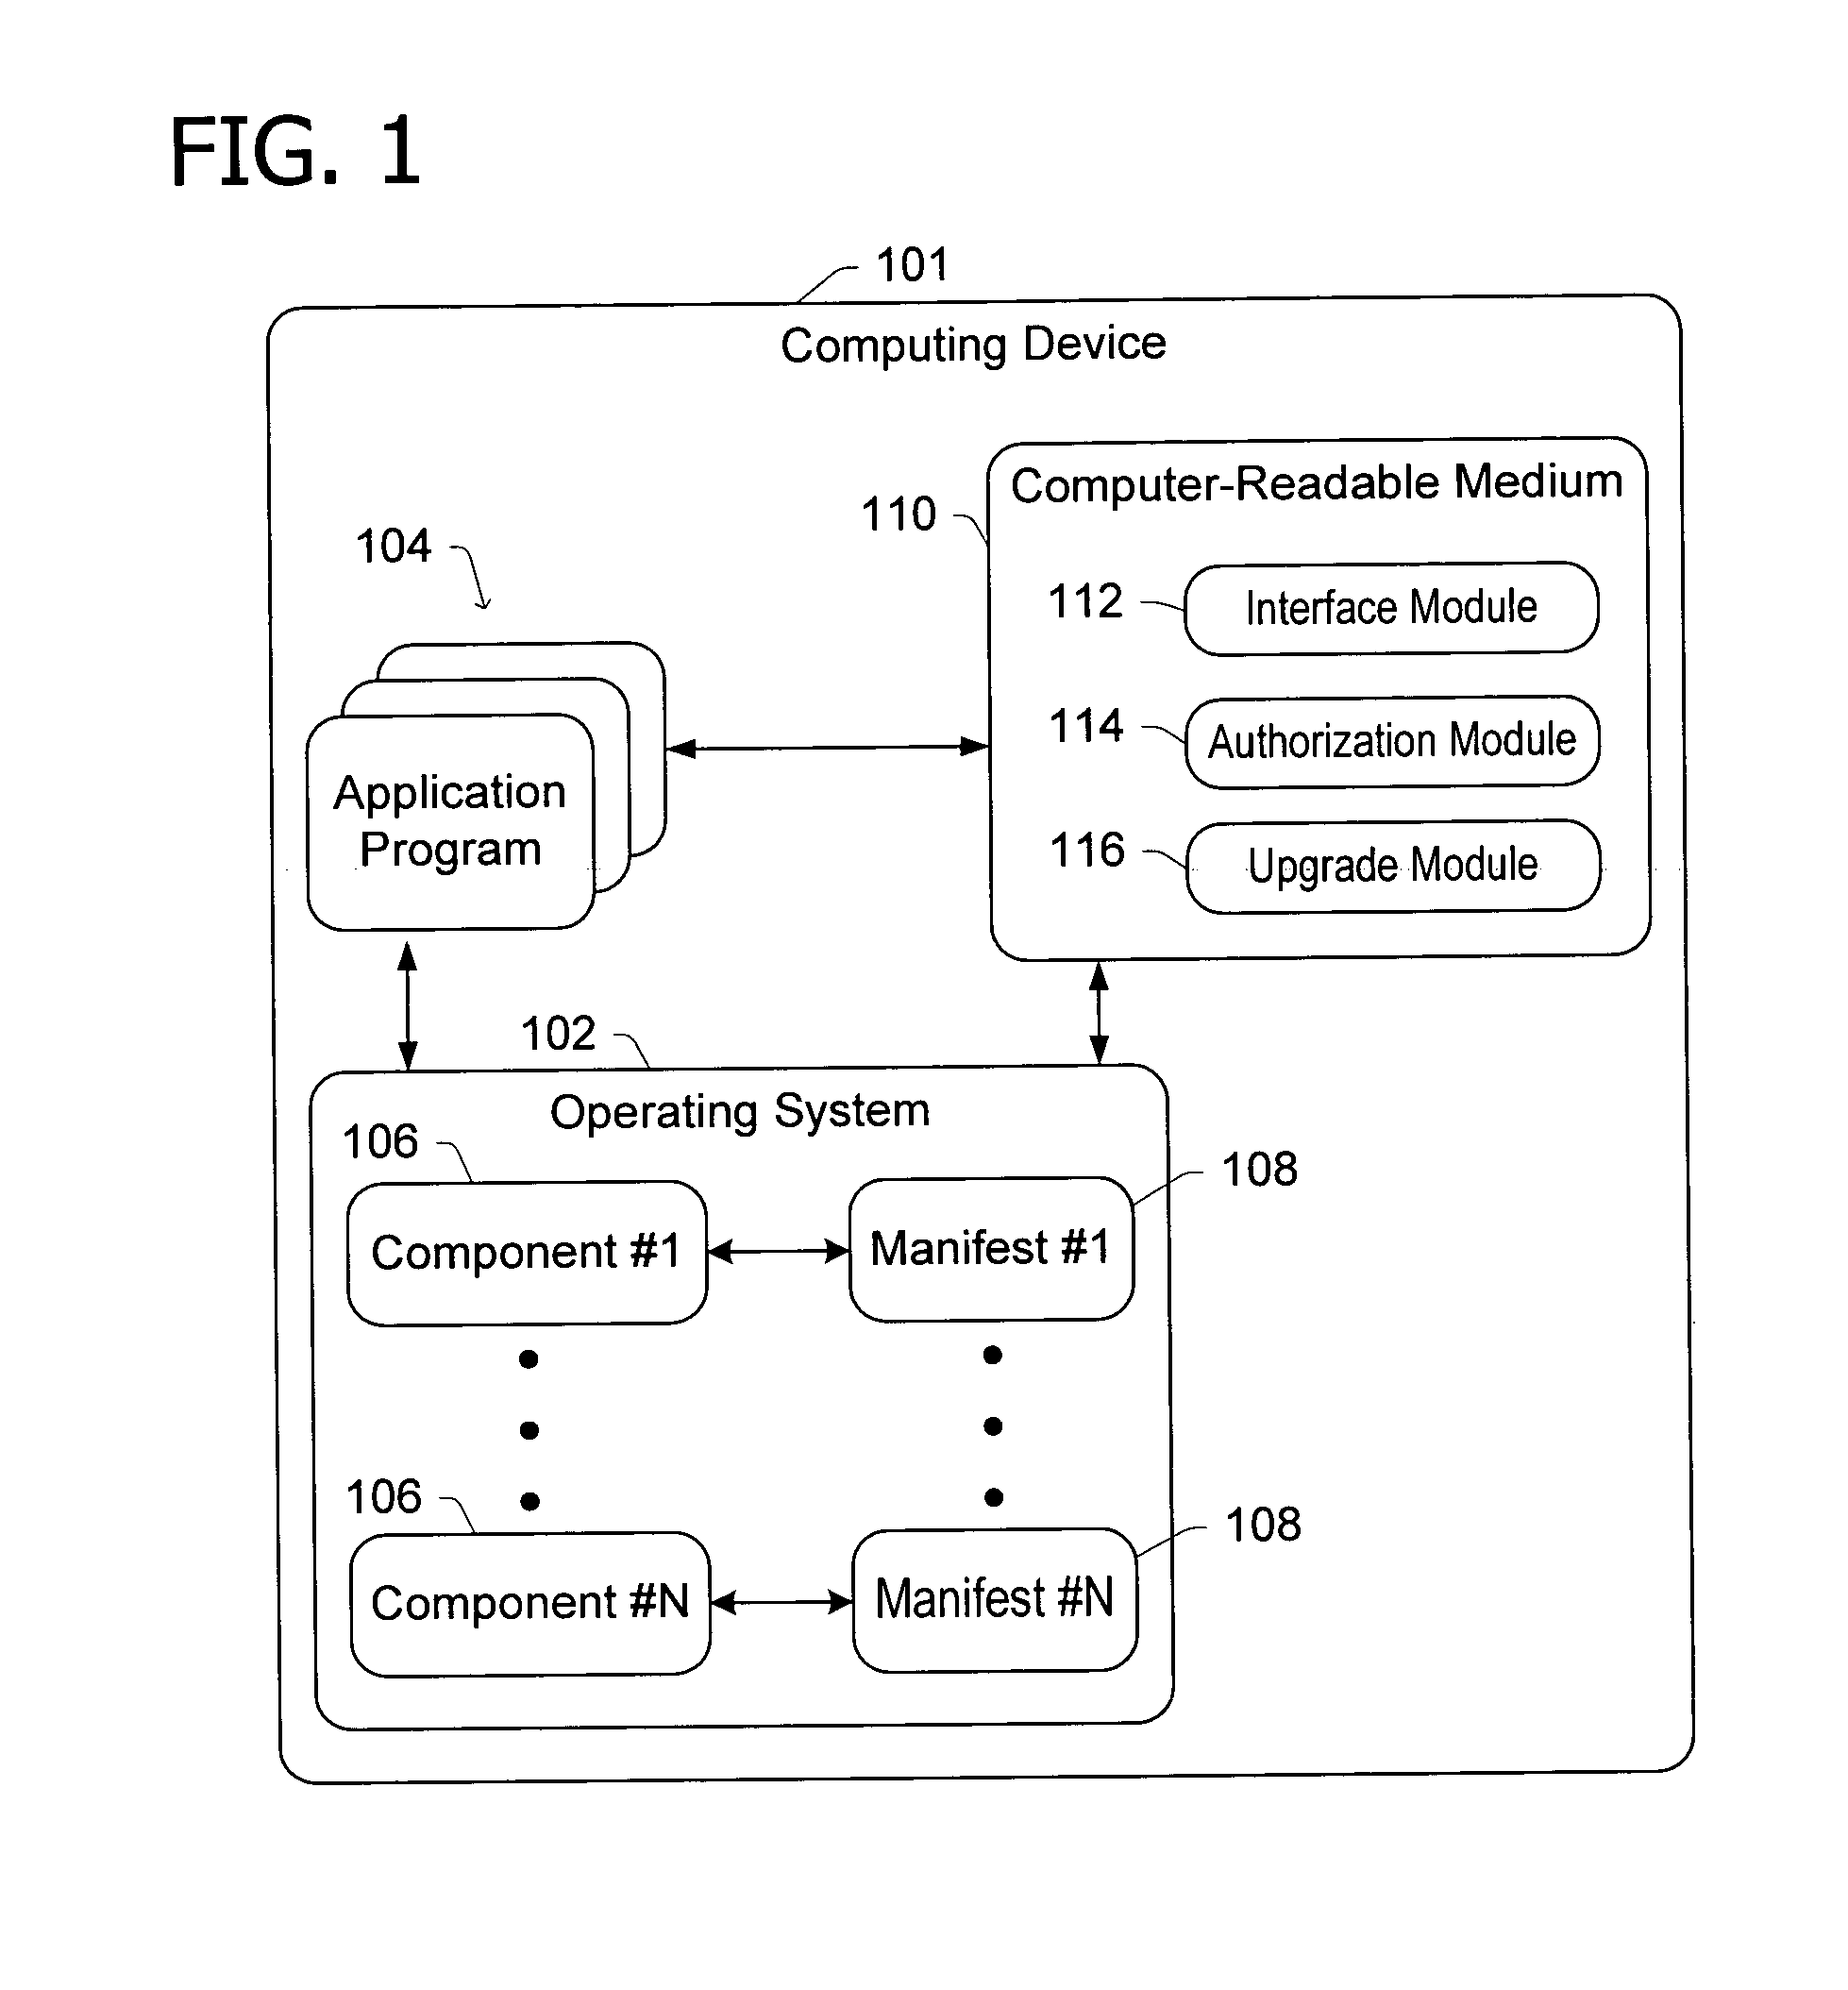 Selectively authorizing software functionality after installation of the software